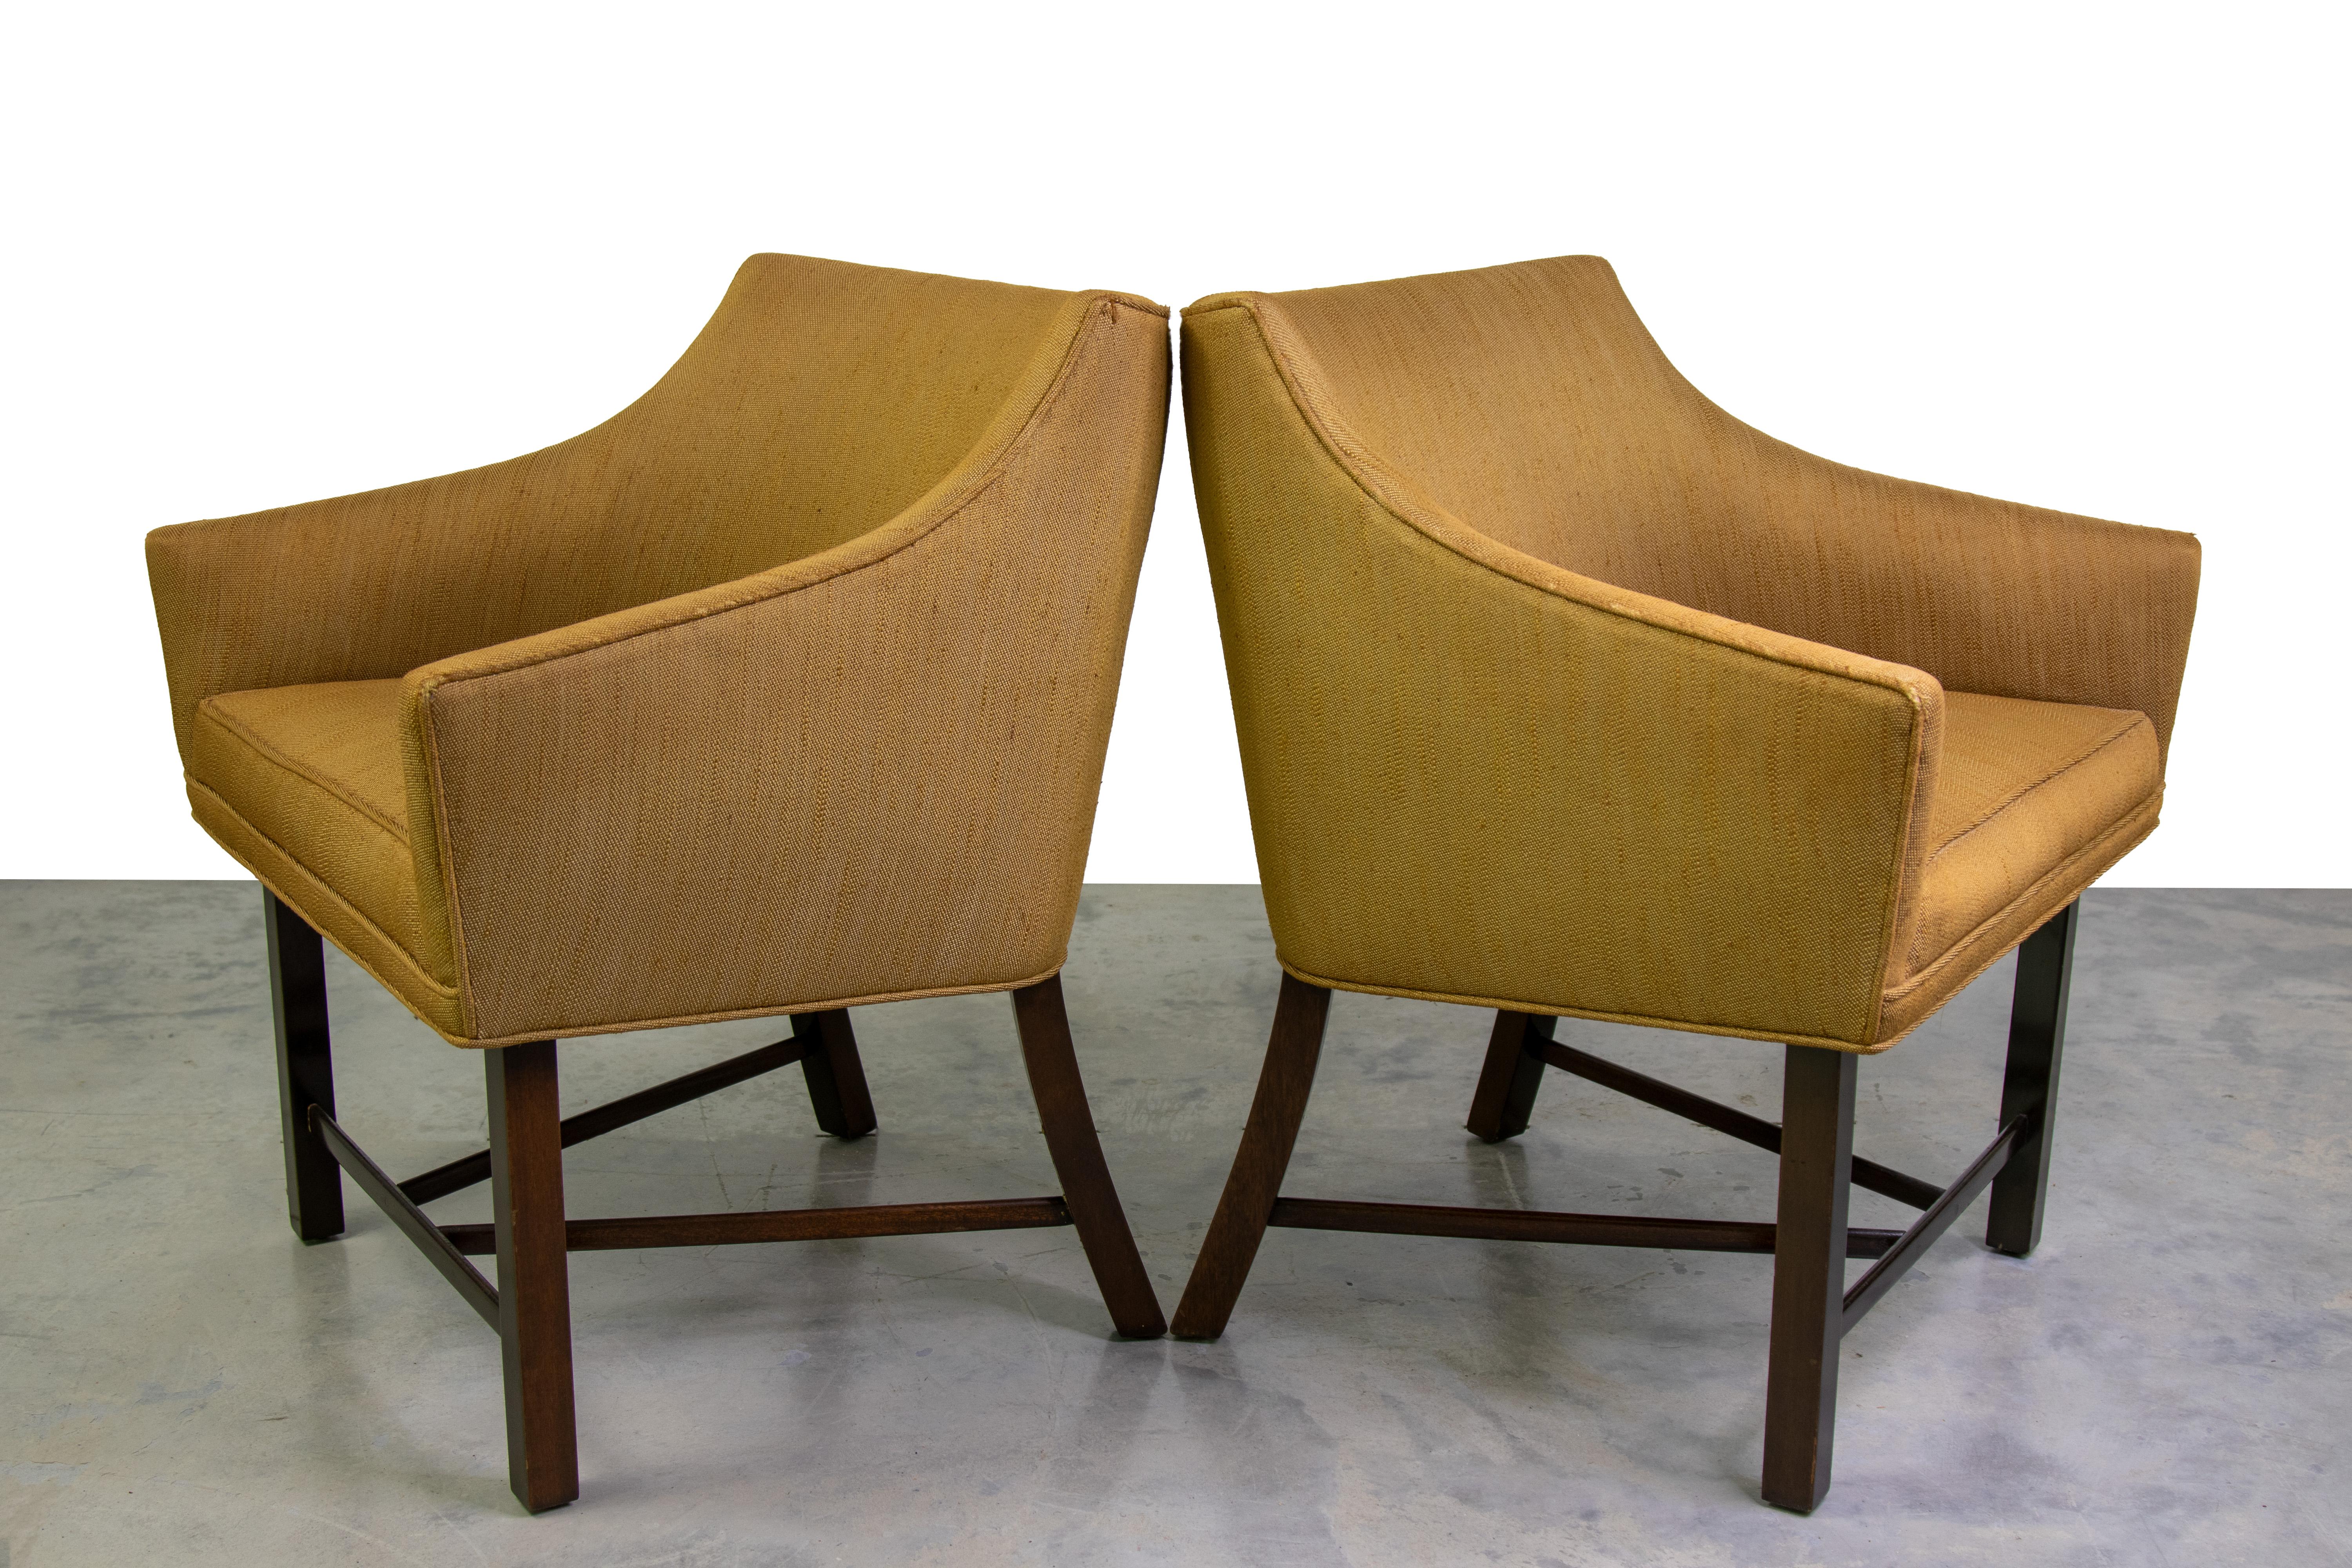 An elegant pair of Harvey Probber Lounge Chairs with curved mahogany legs. Similar lines to Edward Wormley, these chairs are smaller in scale and would work equally well in a large living room space or in front of a desk.  Beautiful design packed in